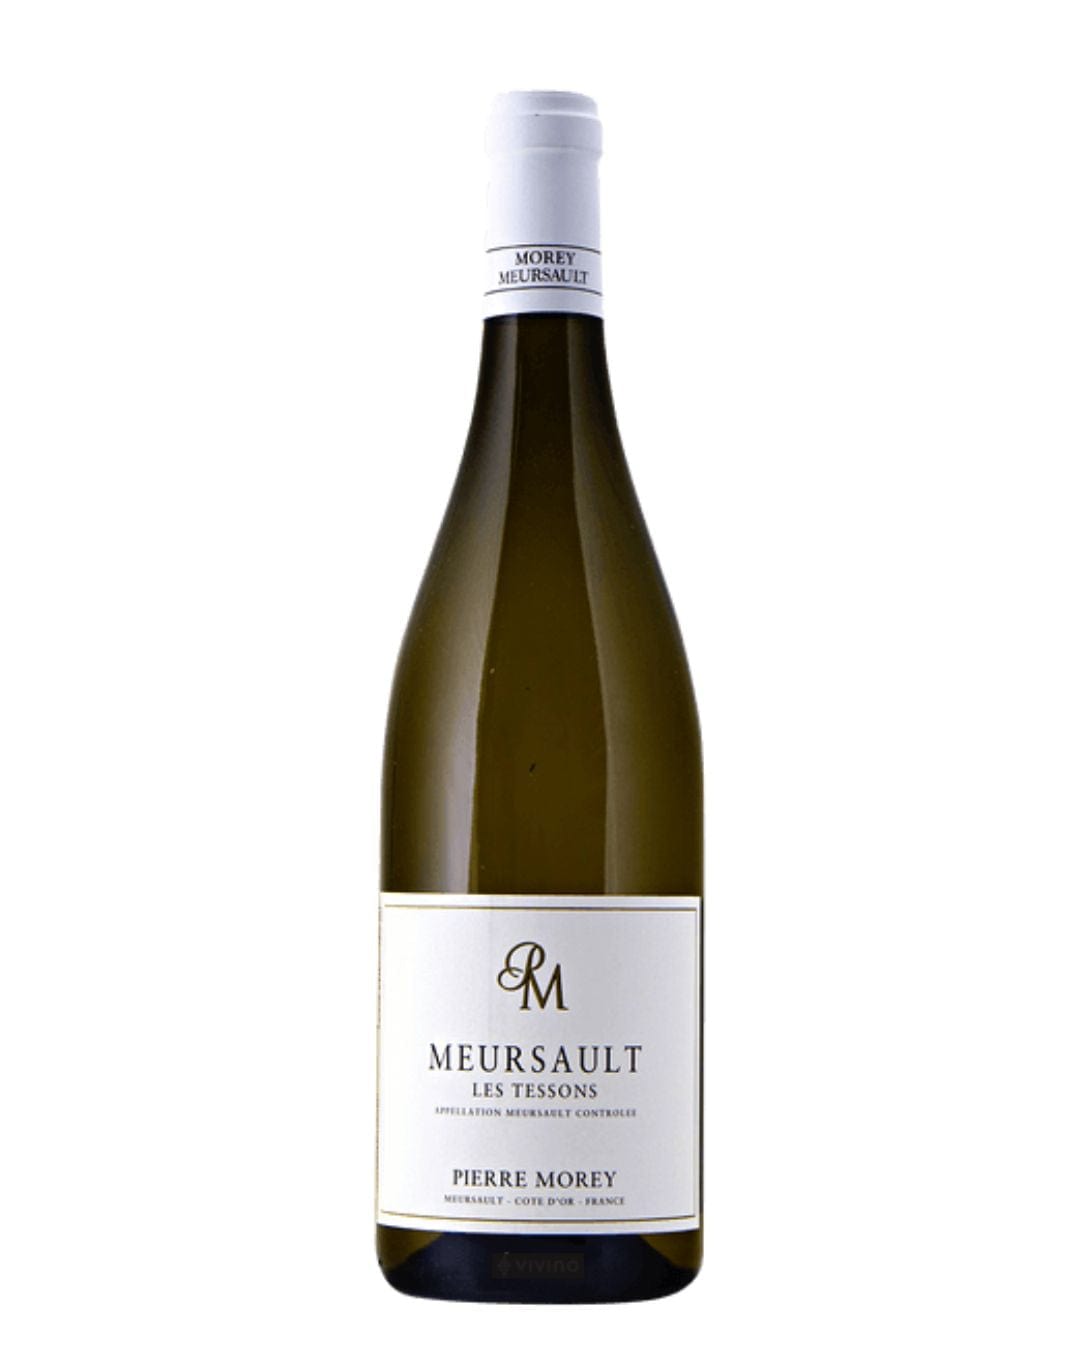 Shop Domaine Pierre Morey Domaine Pierre Morey Meursault Les Tessons 2015 online at PENTICTON artisanal French wine store in Hong Kong. Discover other French wines, promotions, workshops and featured offers at pentictonpacific.com 